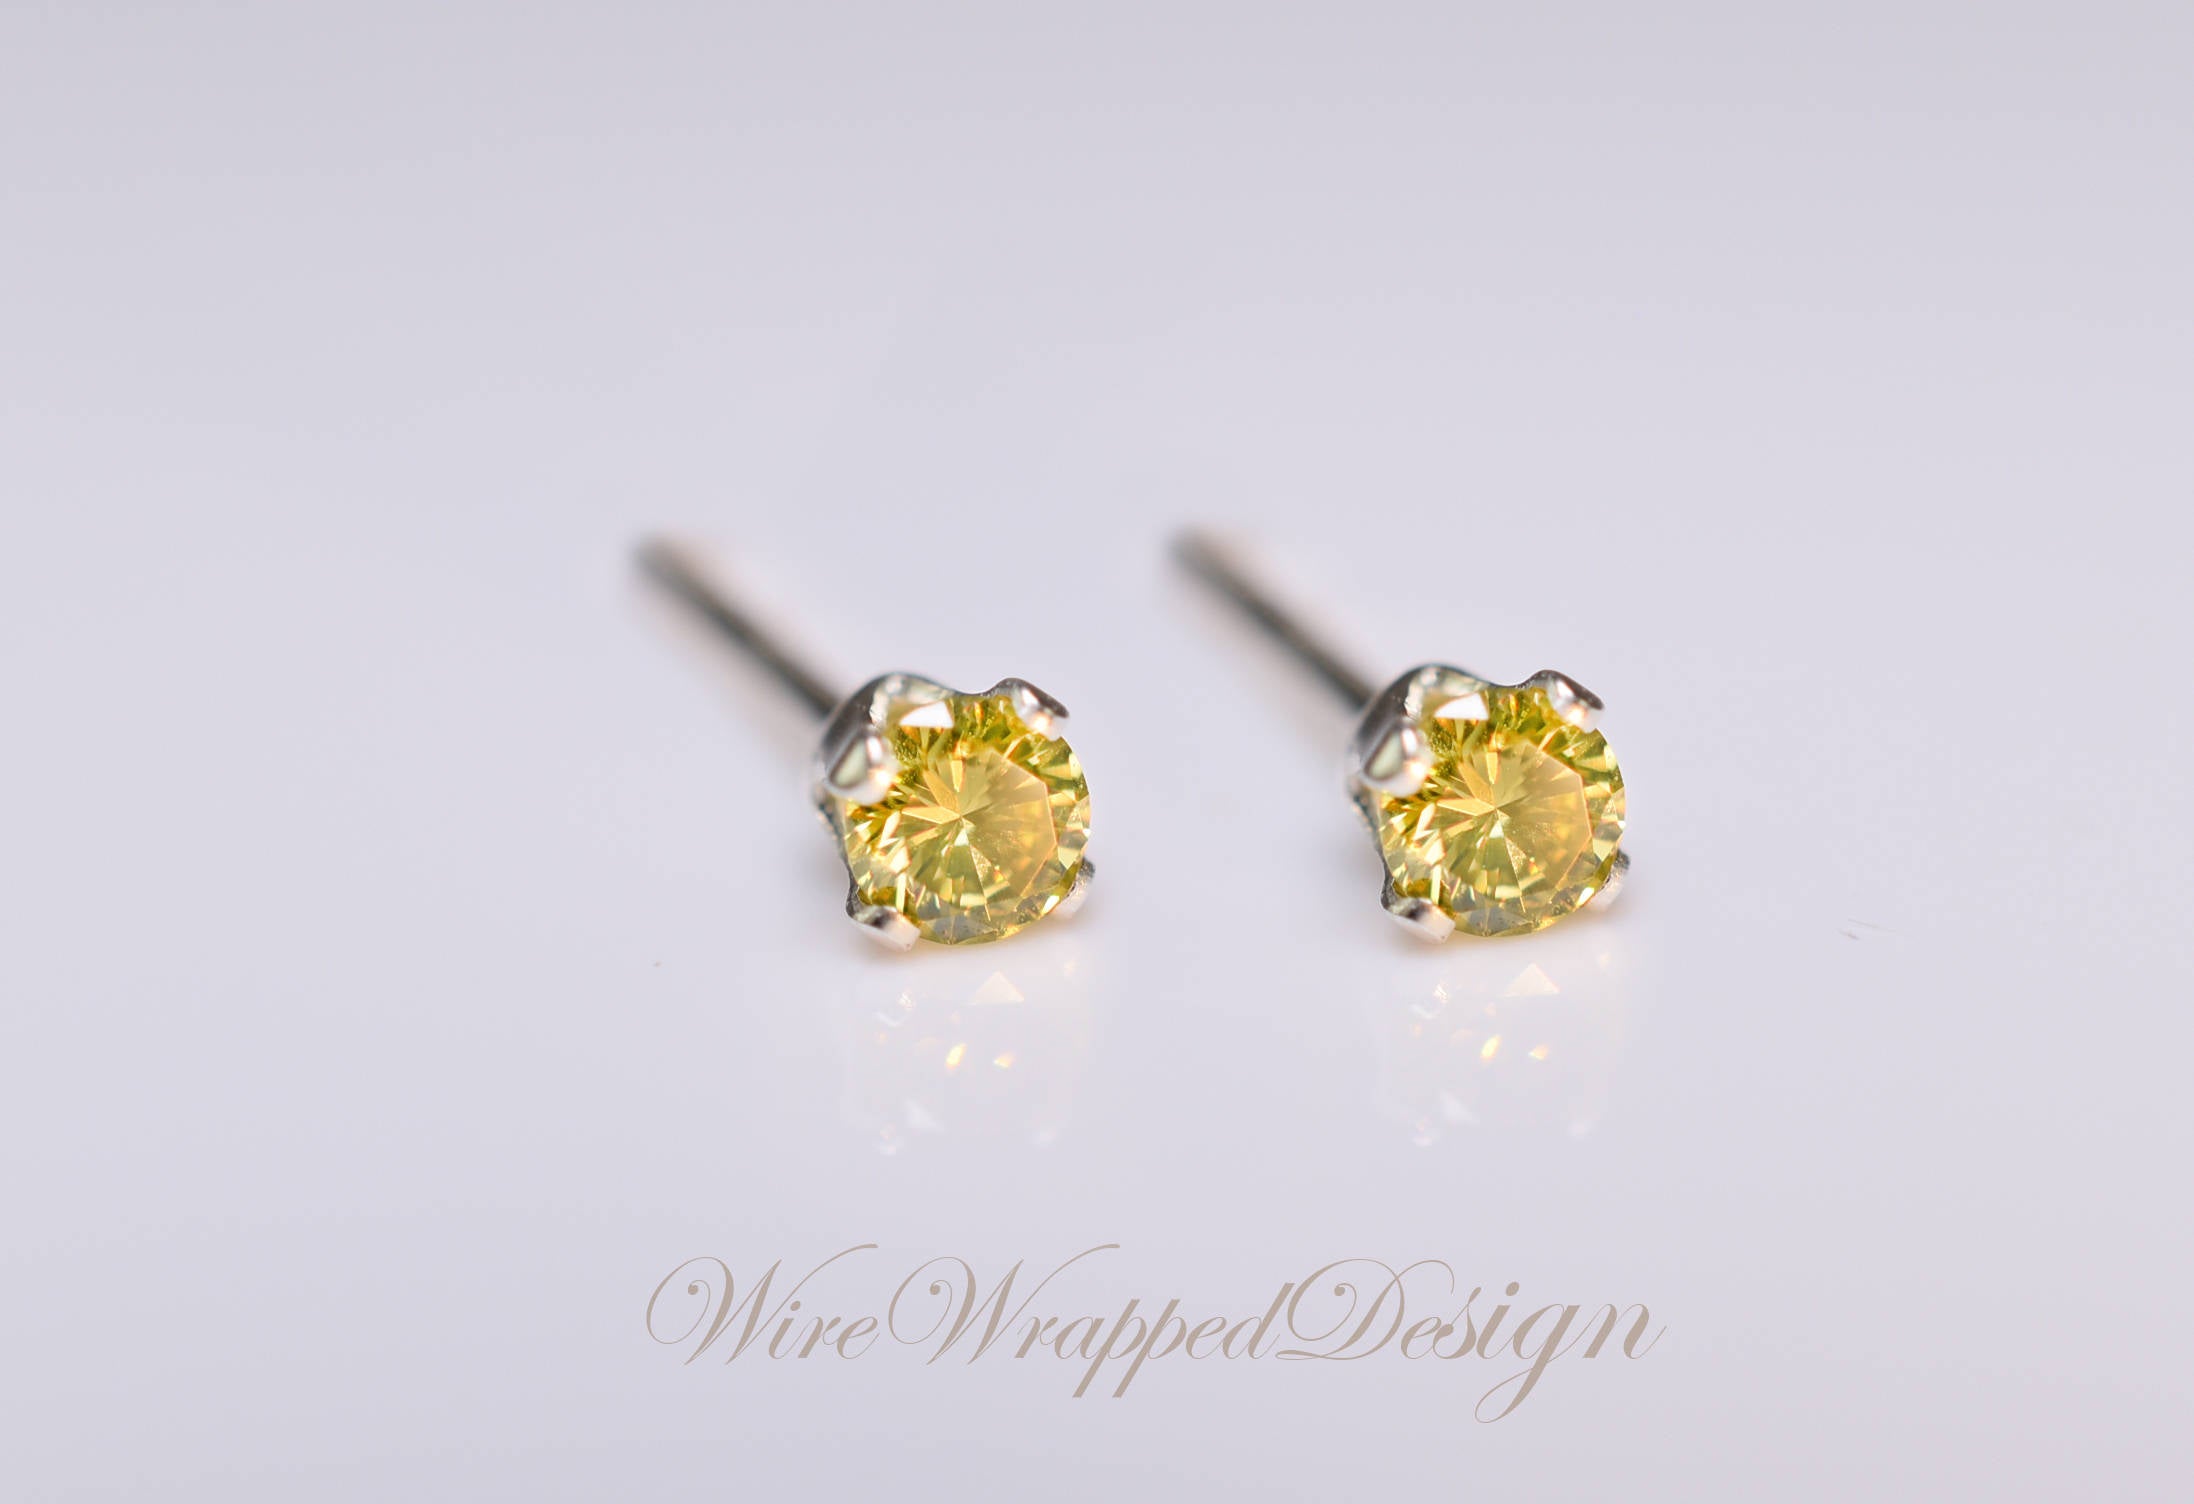 Genuine CANARY Yellow DIAMOND Earring Studs 2mm 0.08tcw Post 14k Solid Gold (Yellow, Rose or White), Platinum, Silver Cartilage Helix Tragus